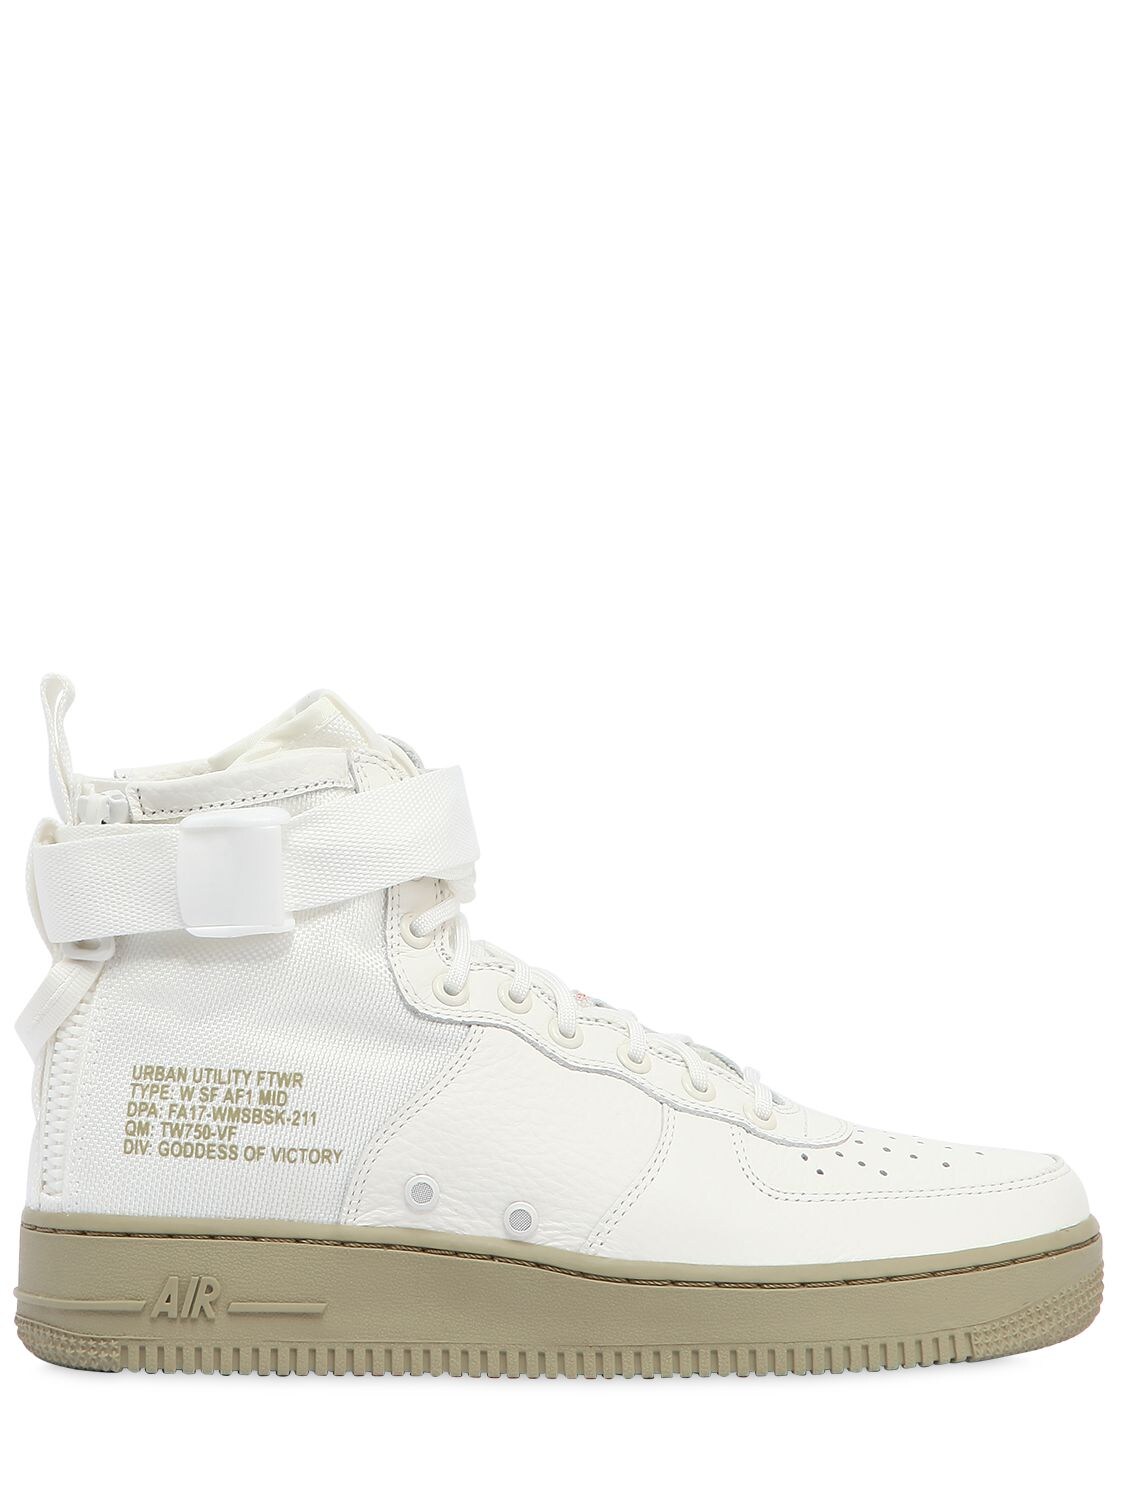 NIKE SF AIR FORCE 1 MID TOP trainers,66IWCD001-MTAw0